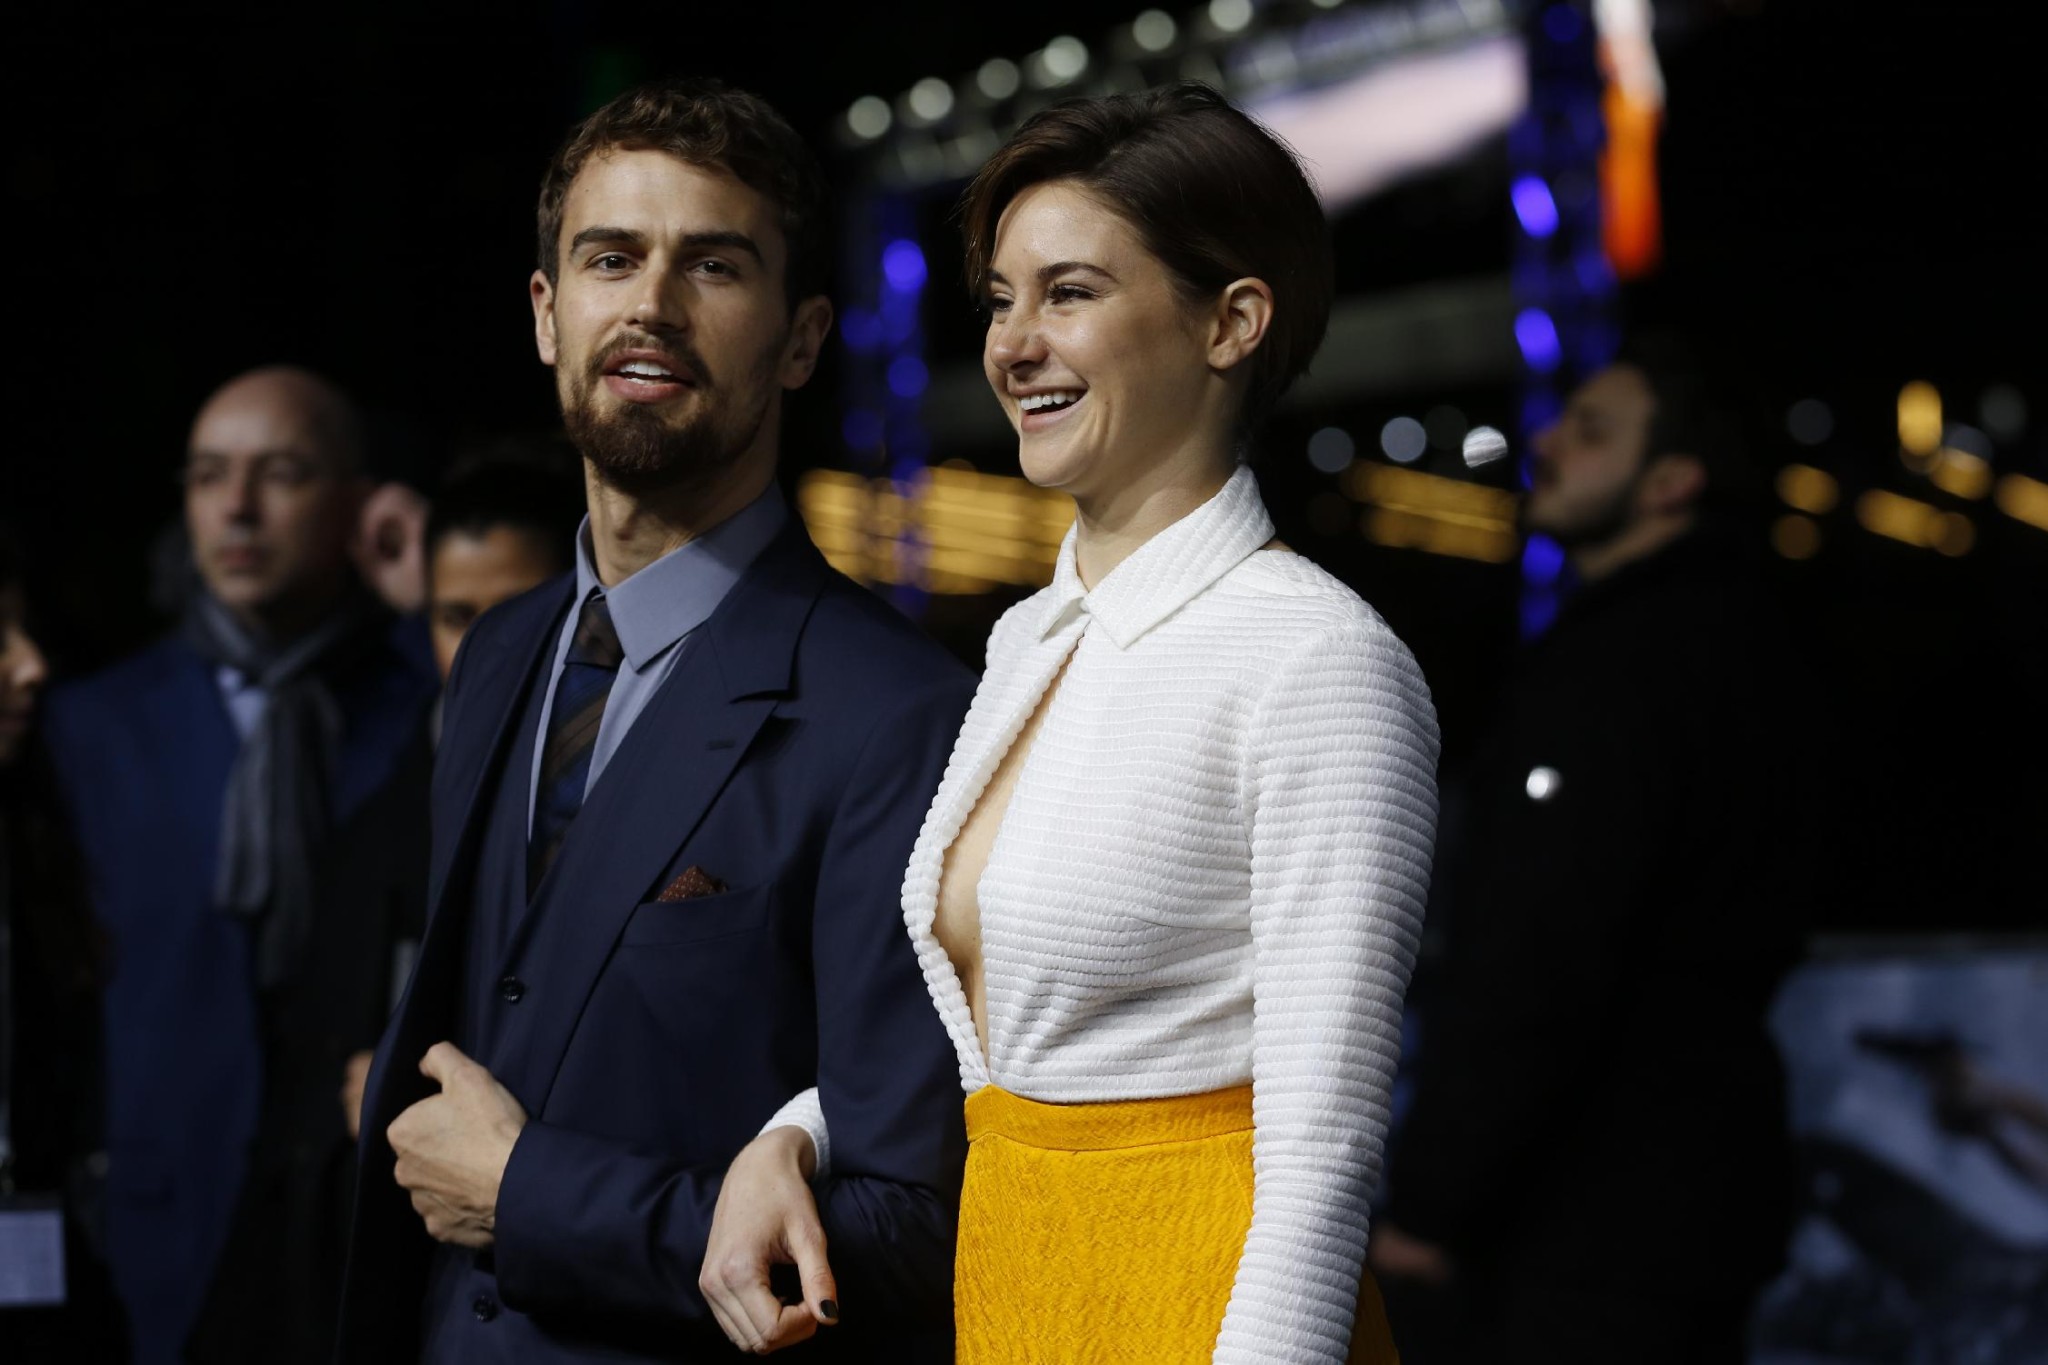 Shailene Woodley braless showing cleavage at the Insurgent premiere in Berlin #75170093